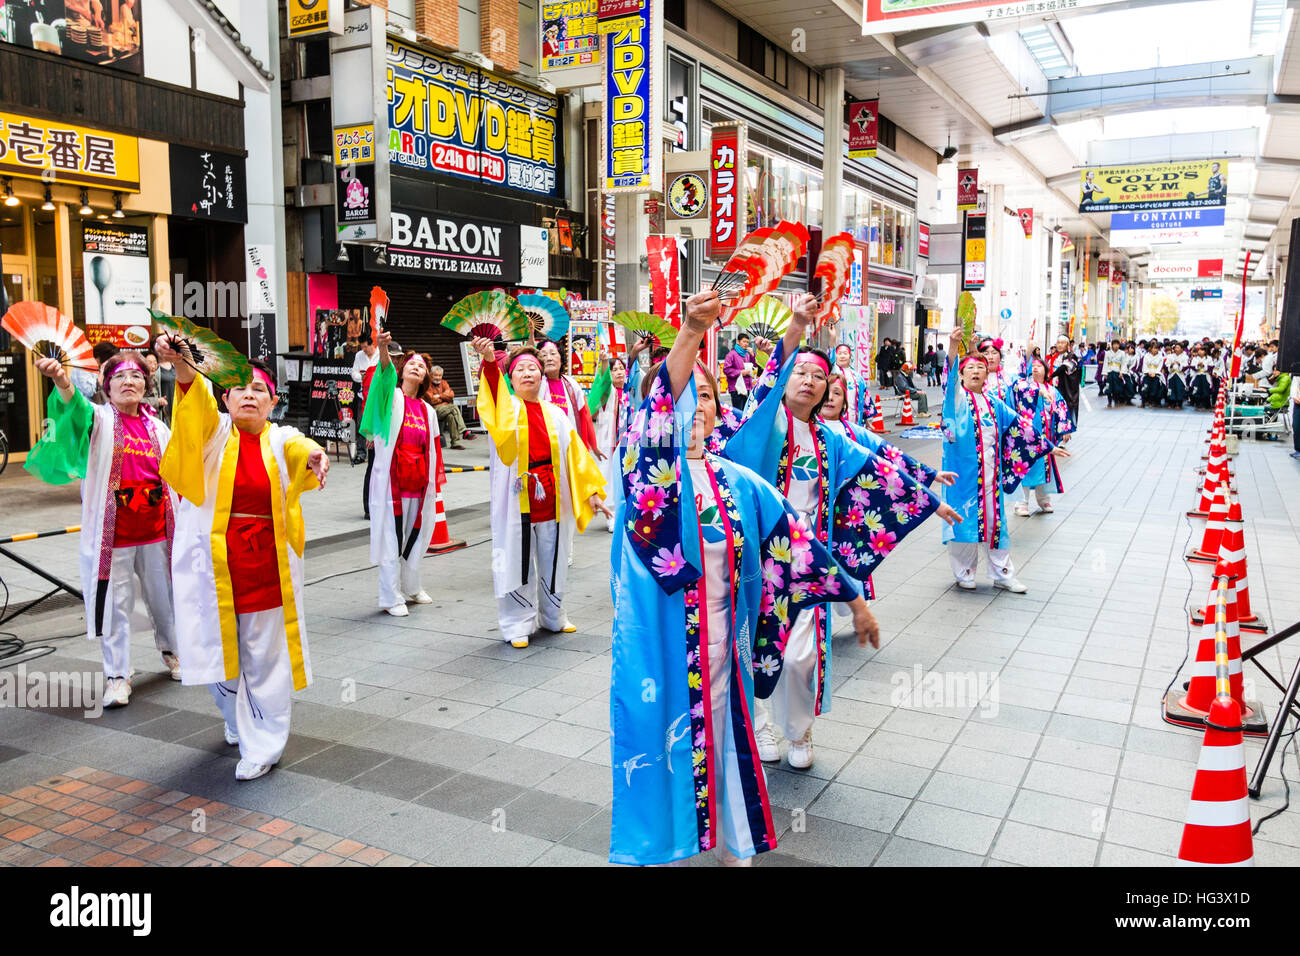 Japanese Yosakoi festival. Three rows of mature women in colourful happi coats, jackets, dancing and holding fans in shopping arcade. Stock Photo